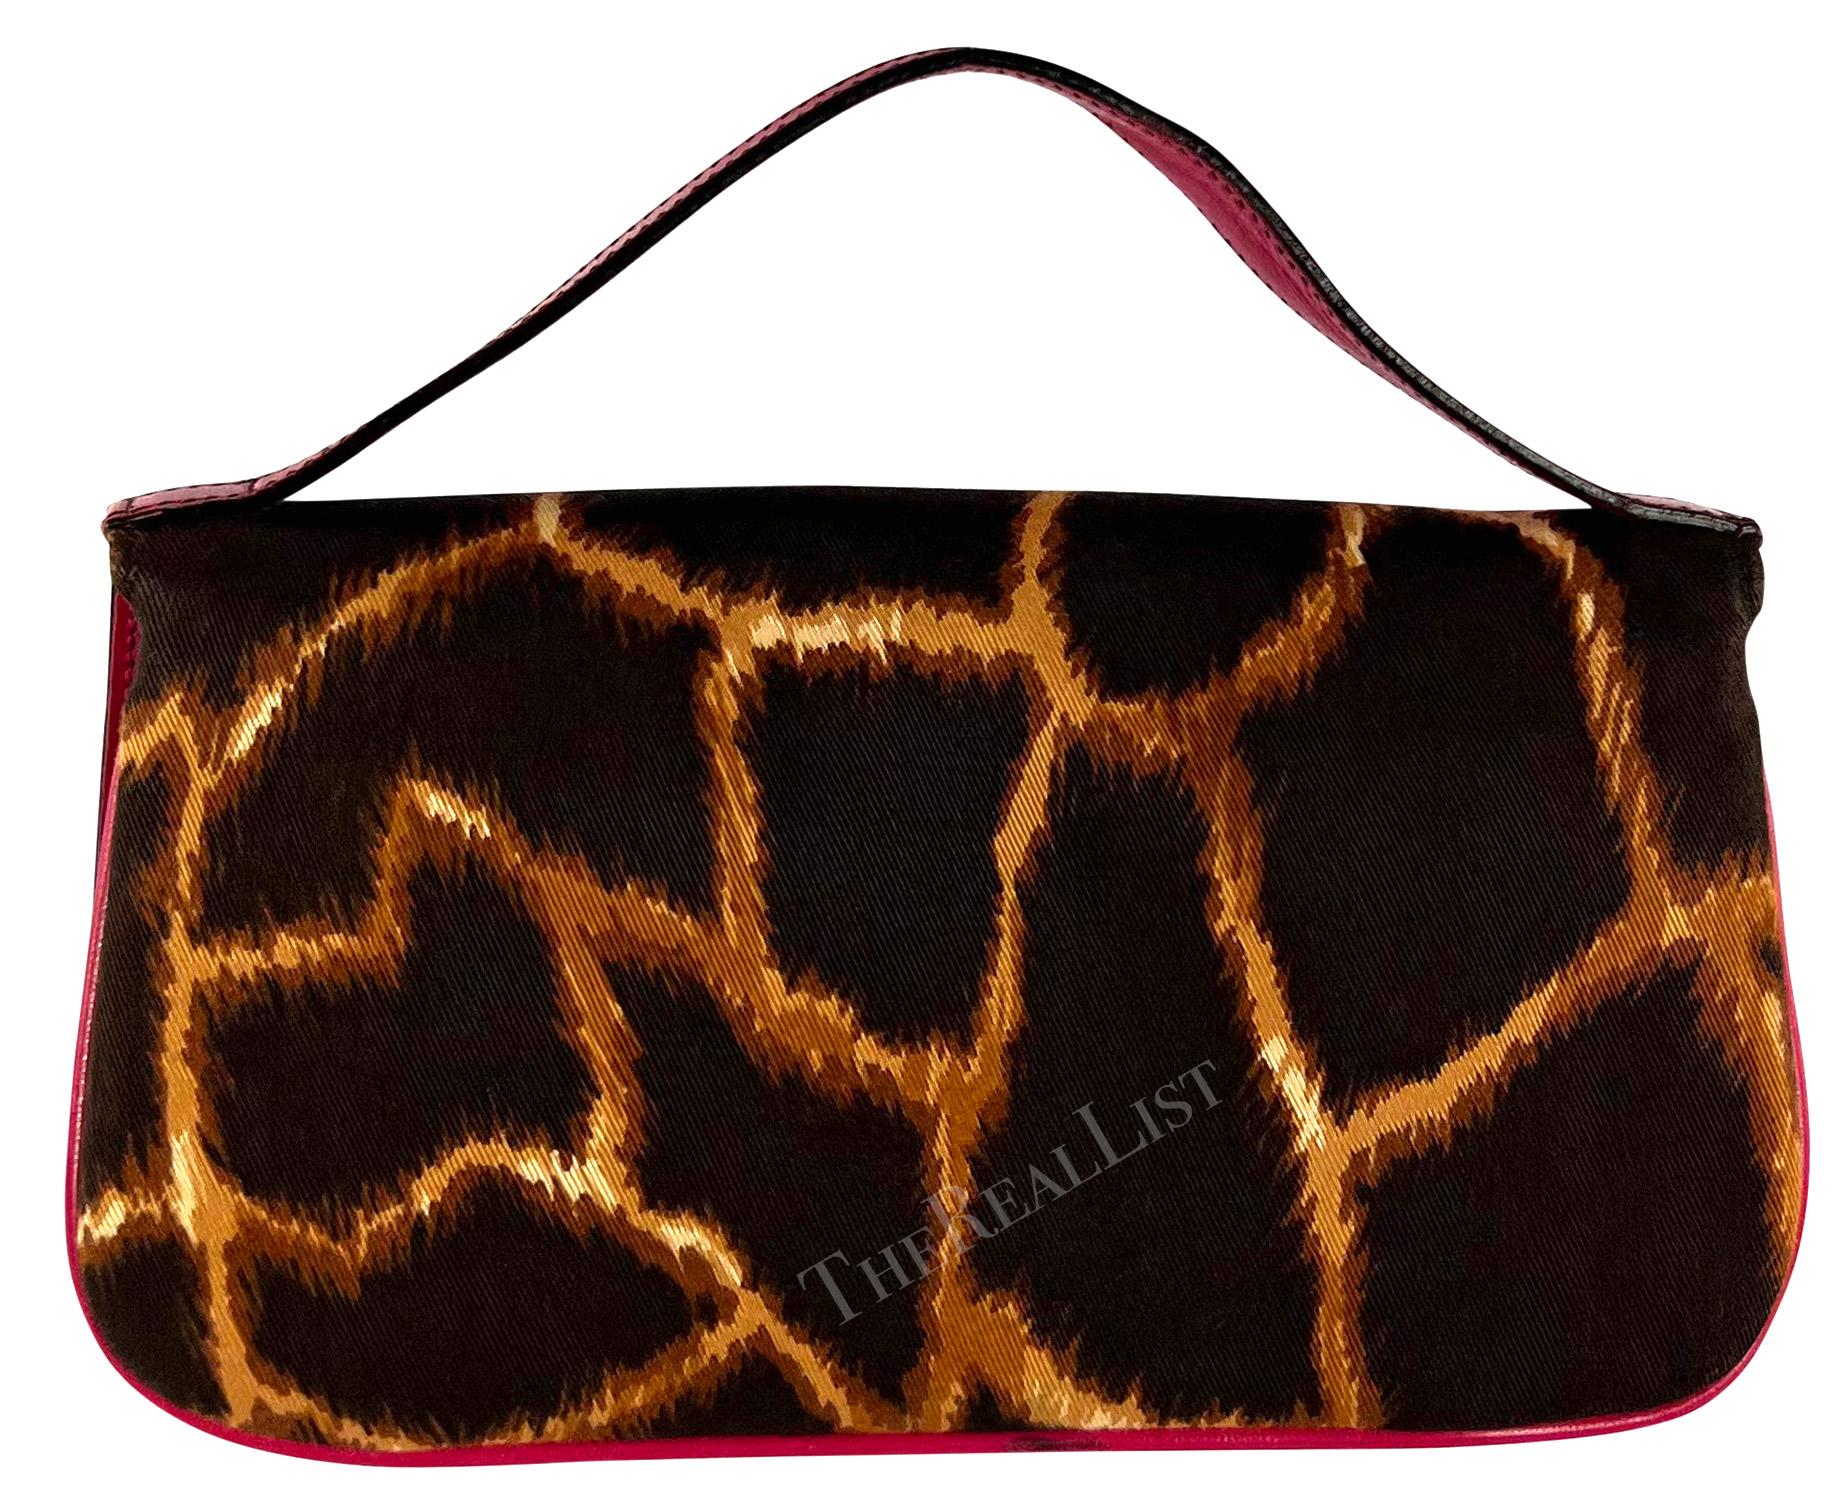 2000s Dolce & Gabbana Brown Animal Print Hot Pink Leather Top Strap Clutch Bag For Sale 1